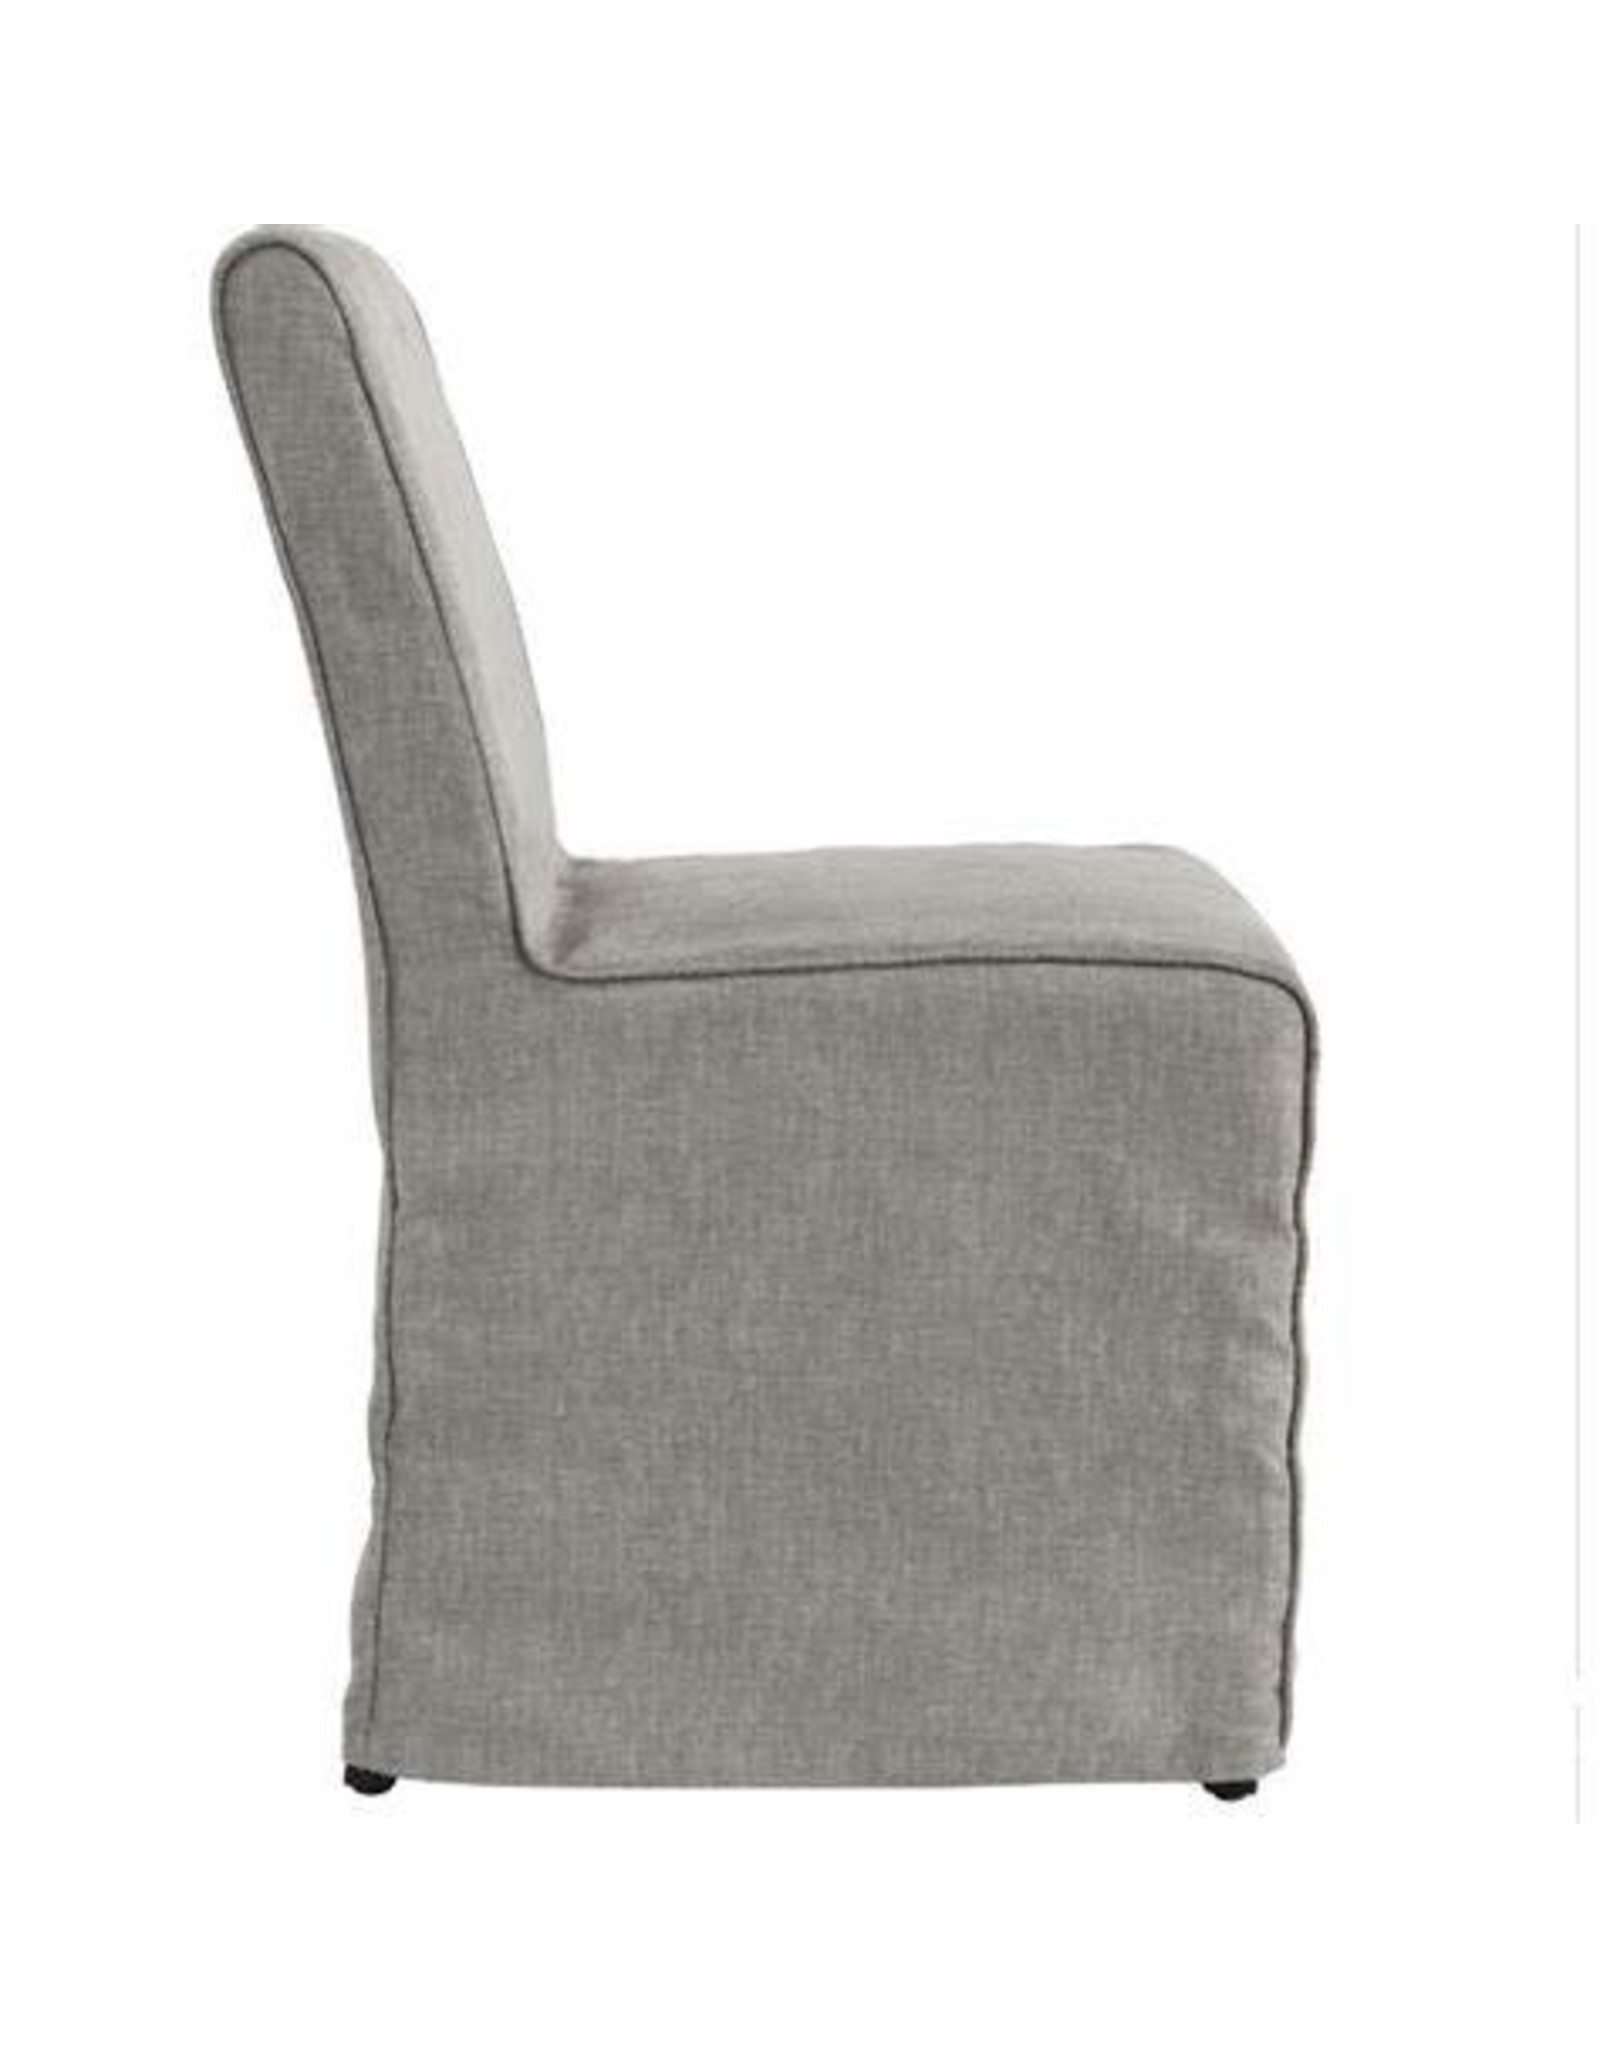 53004283 Brianna Upholstered Dining Chair 19W X 24D X 43H